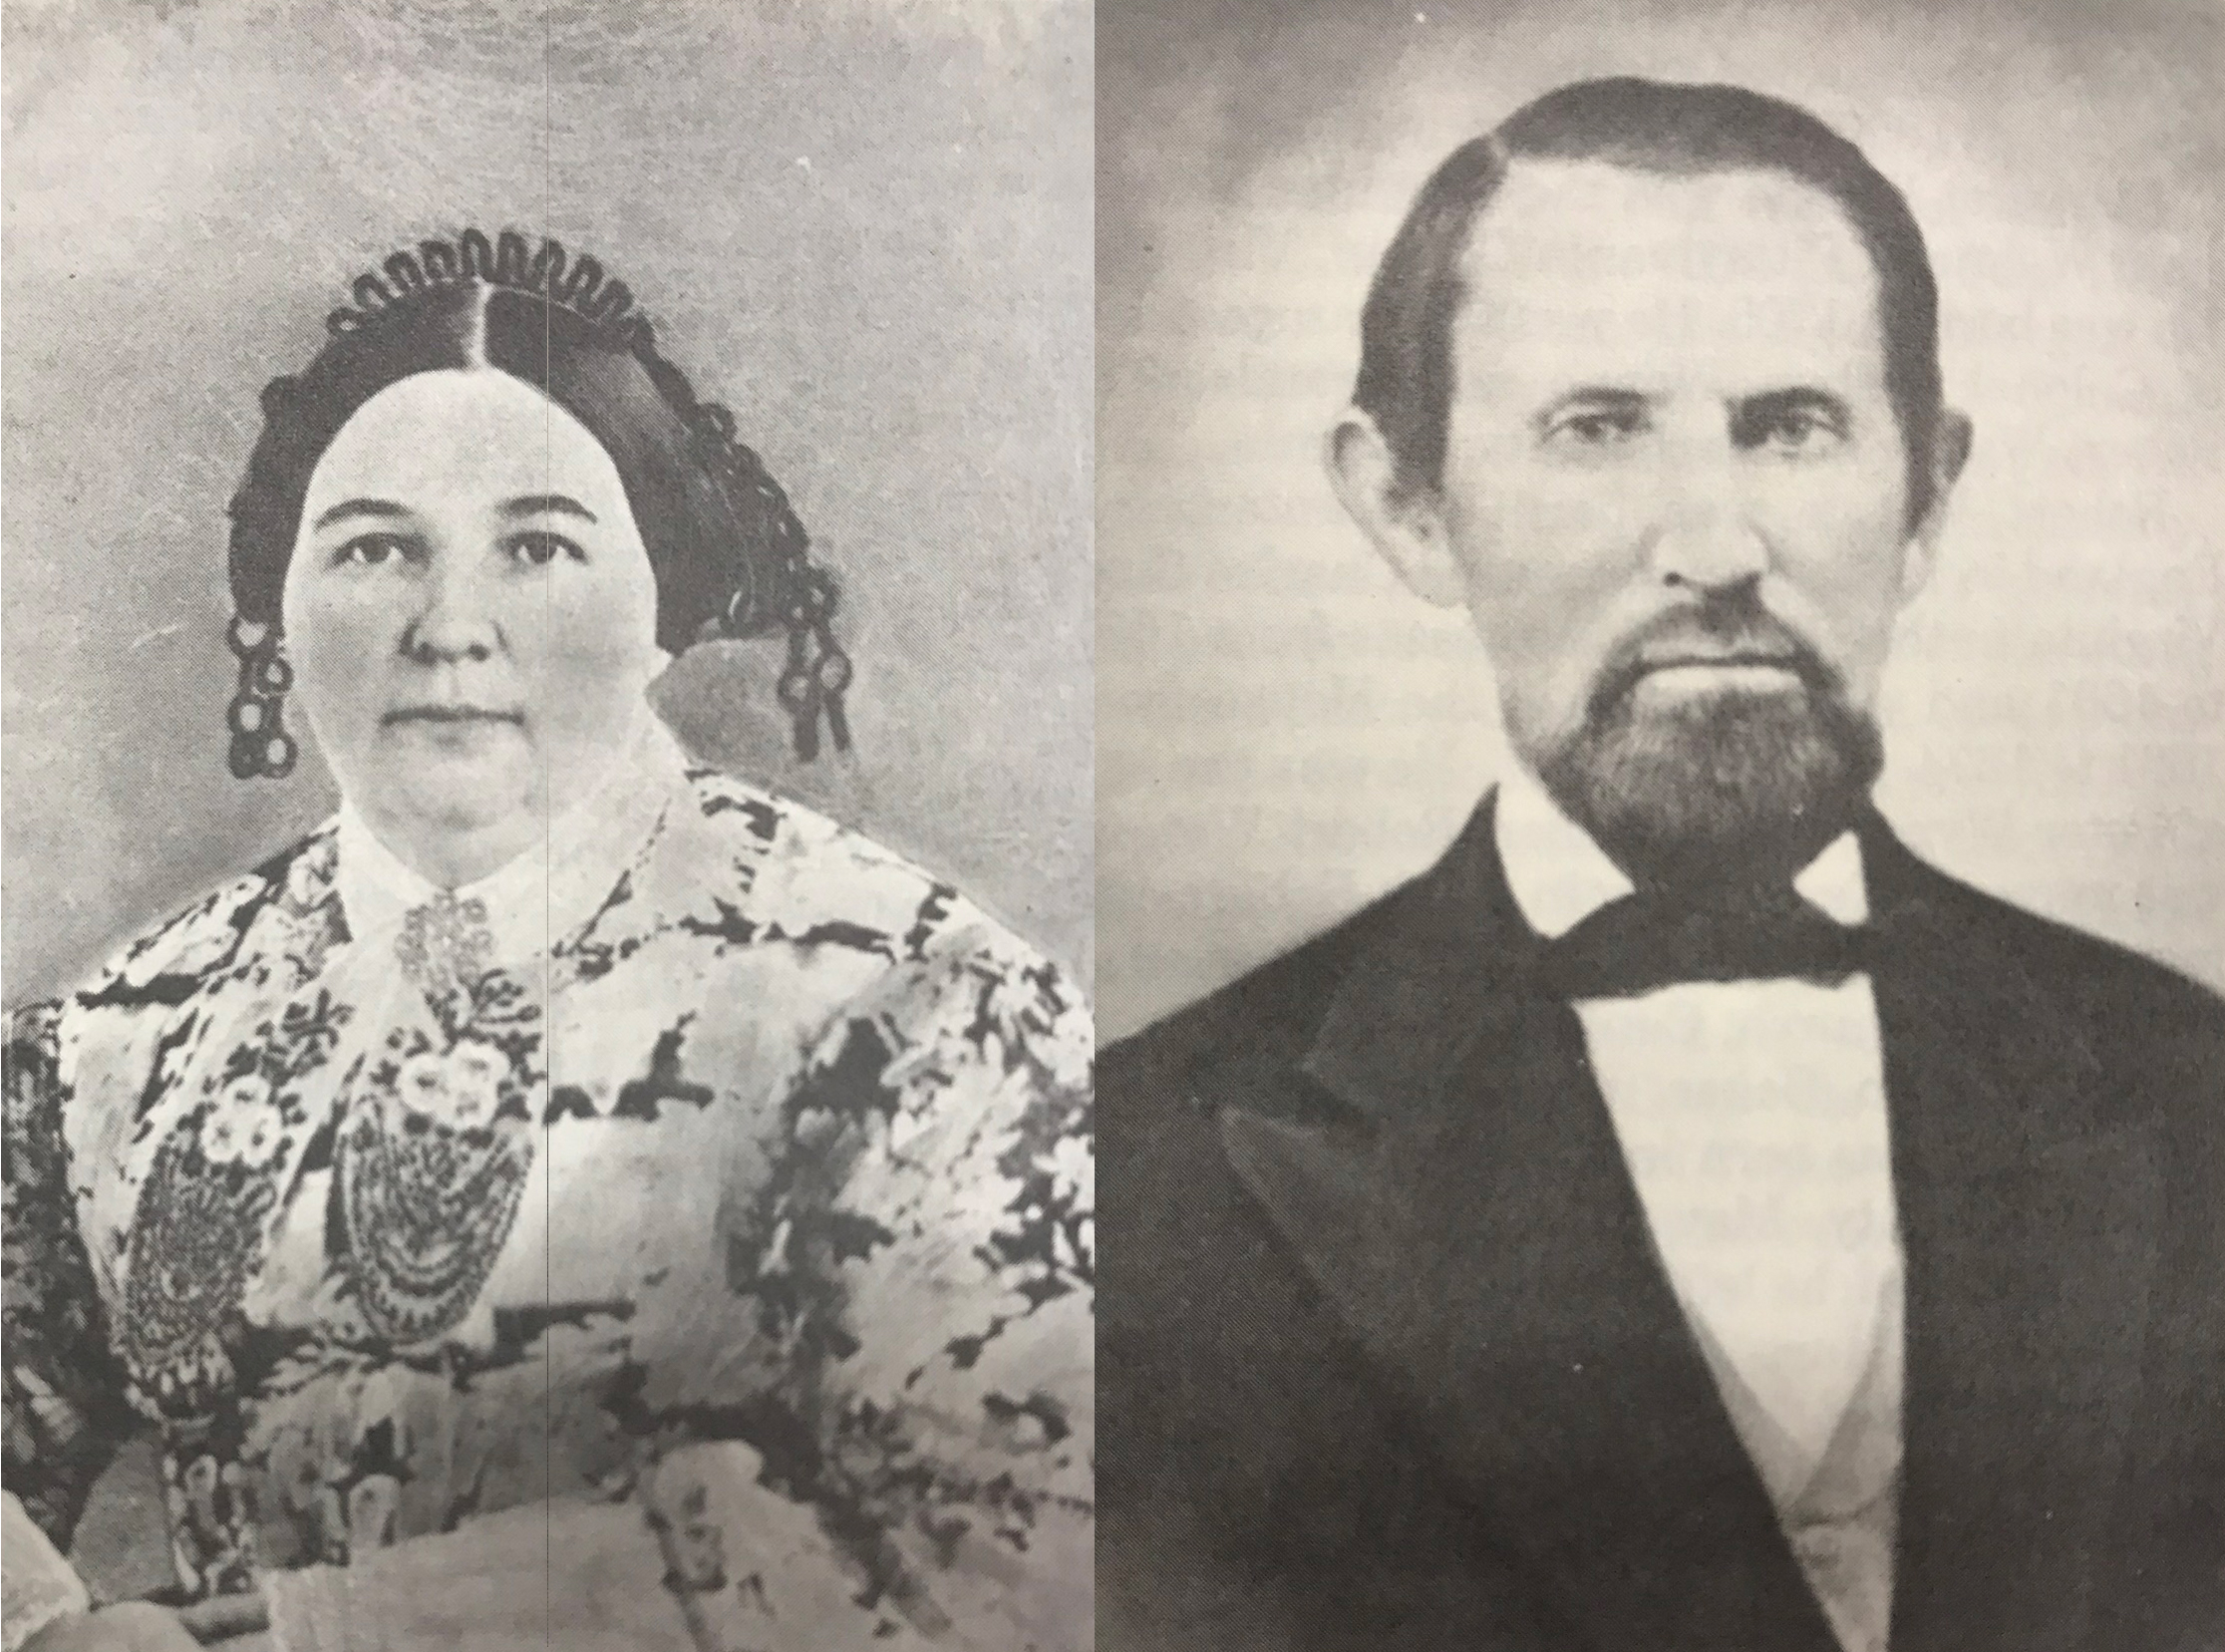 Two indivual black and white portraits of the Hendrick couple side-by-side, with the matriarch on the left wearing an elaborate hair adornment and the patriarch on the right in a suit.